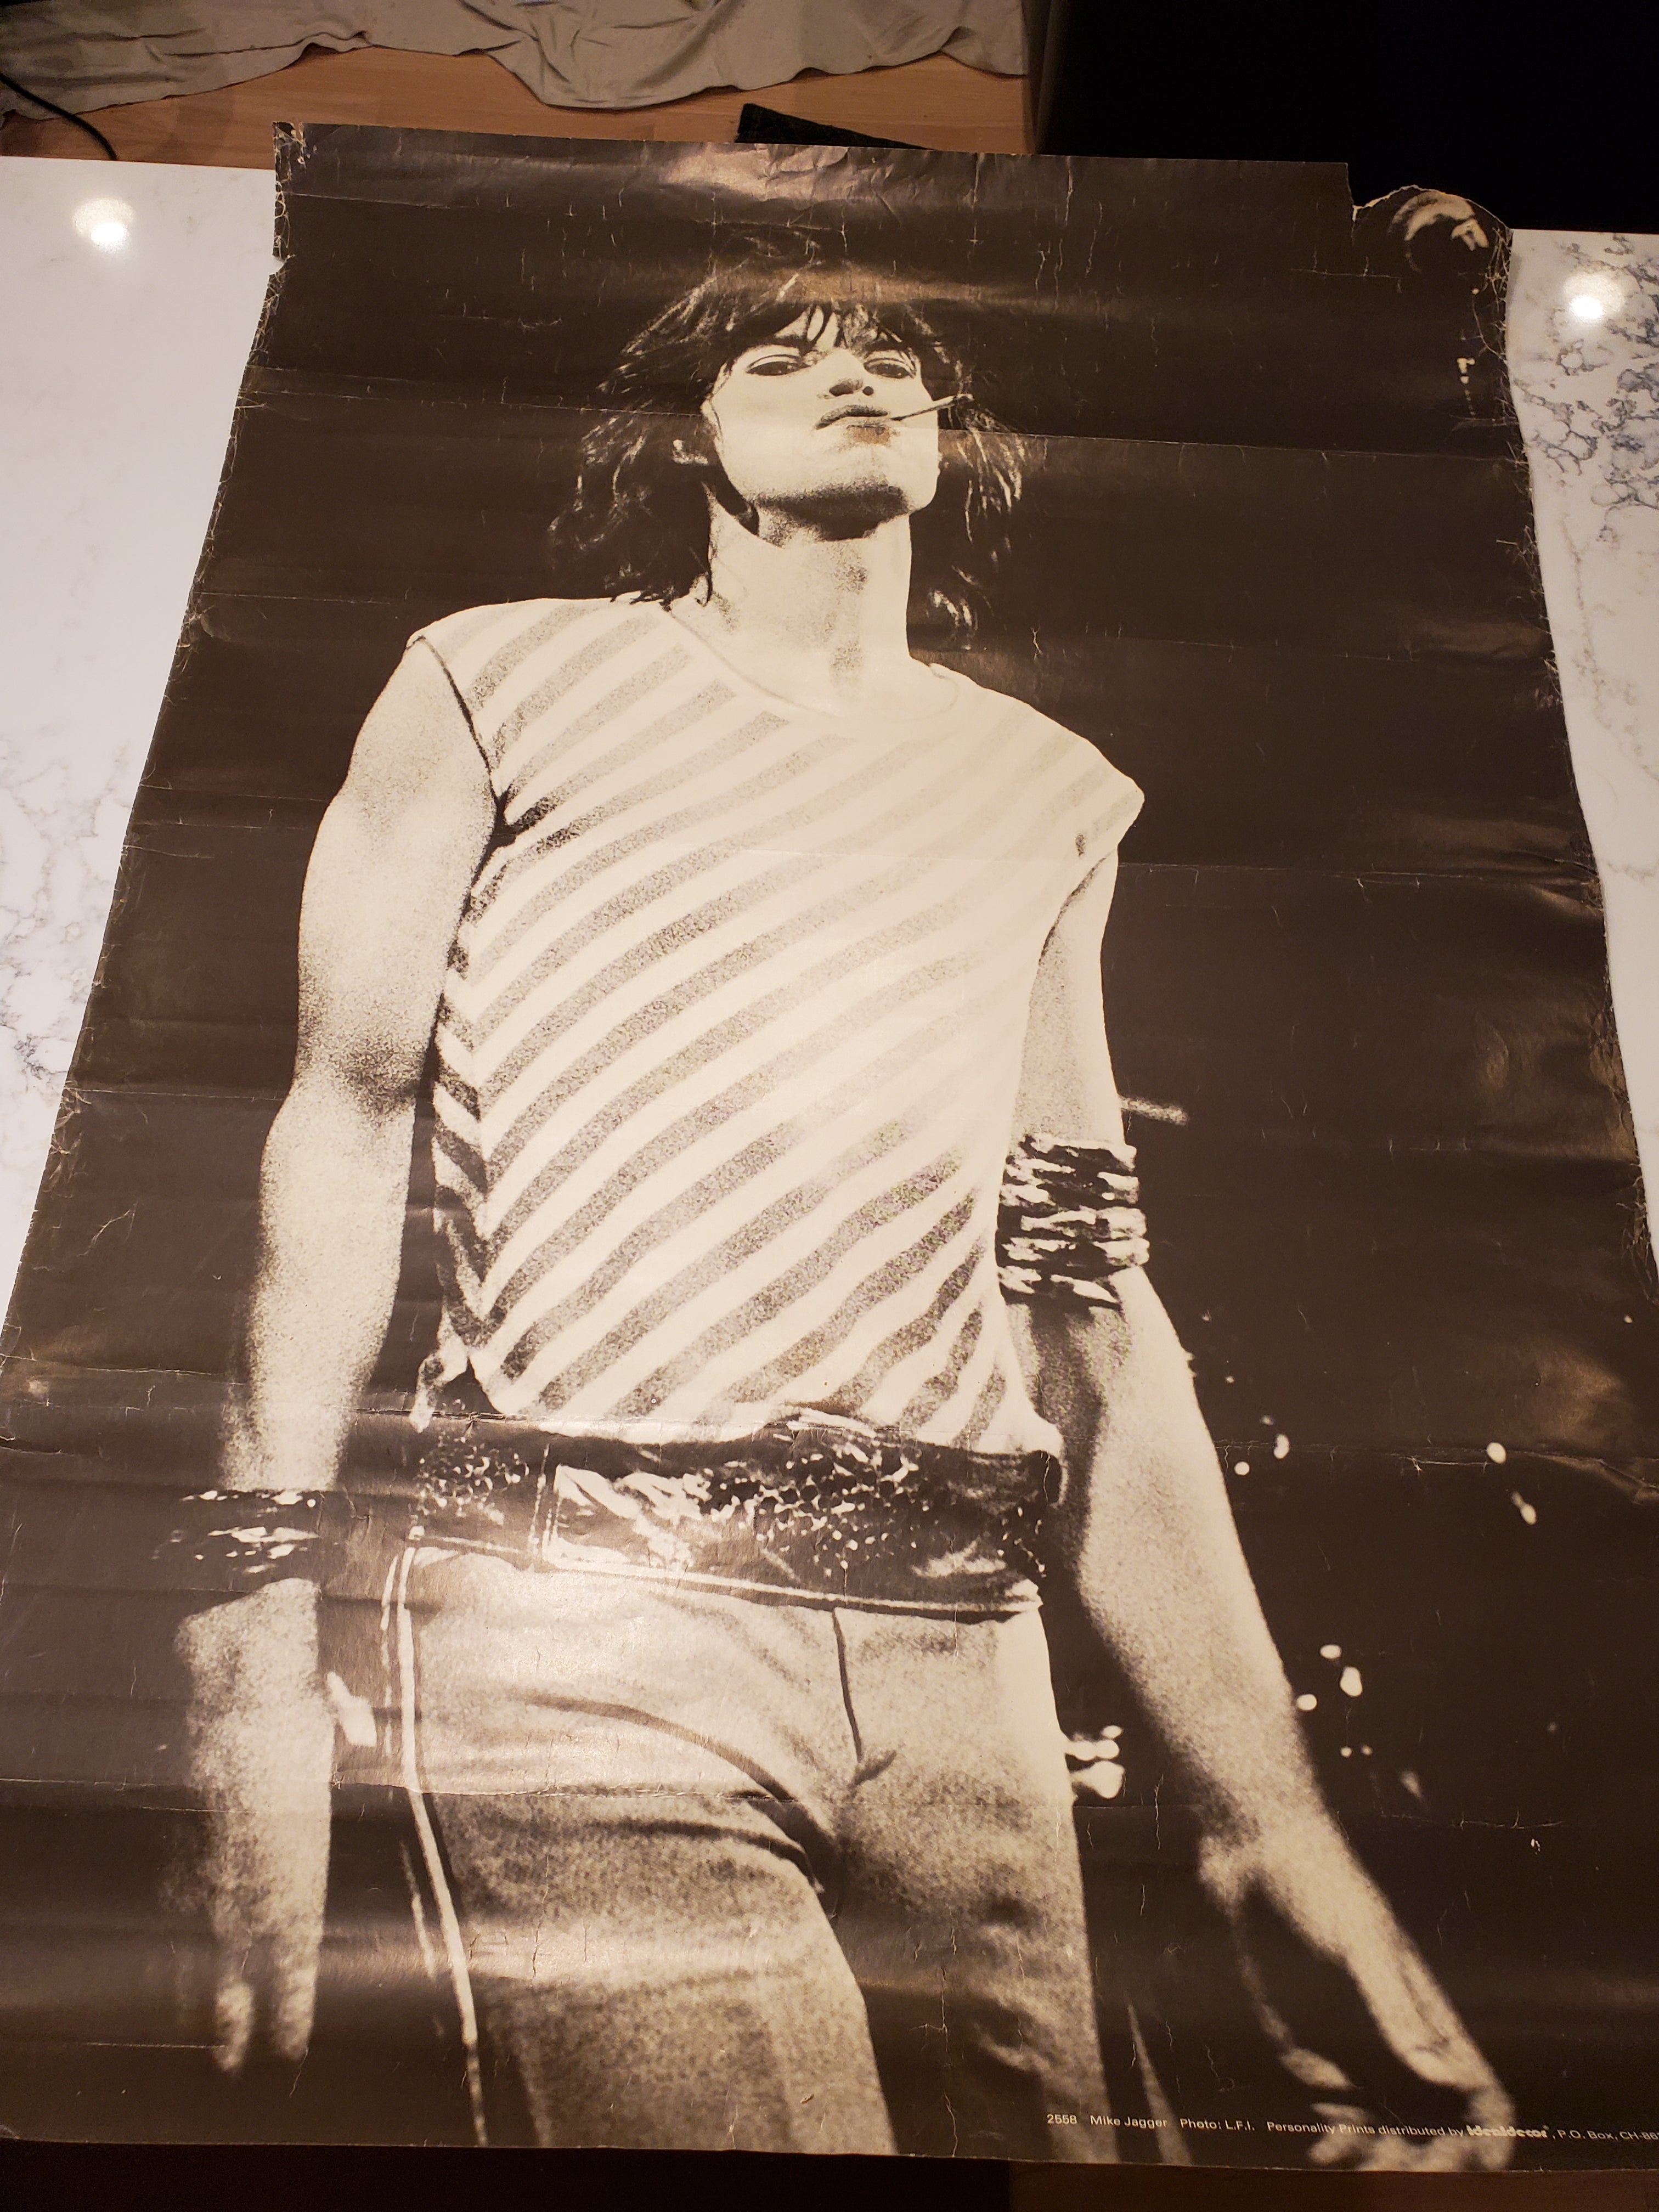 Notes:  Mick Jagger  Mike Jagger  A must for any Rolling Stones fan.  Poster shows its age, but will frame up nice!